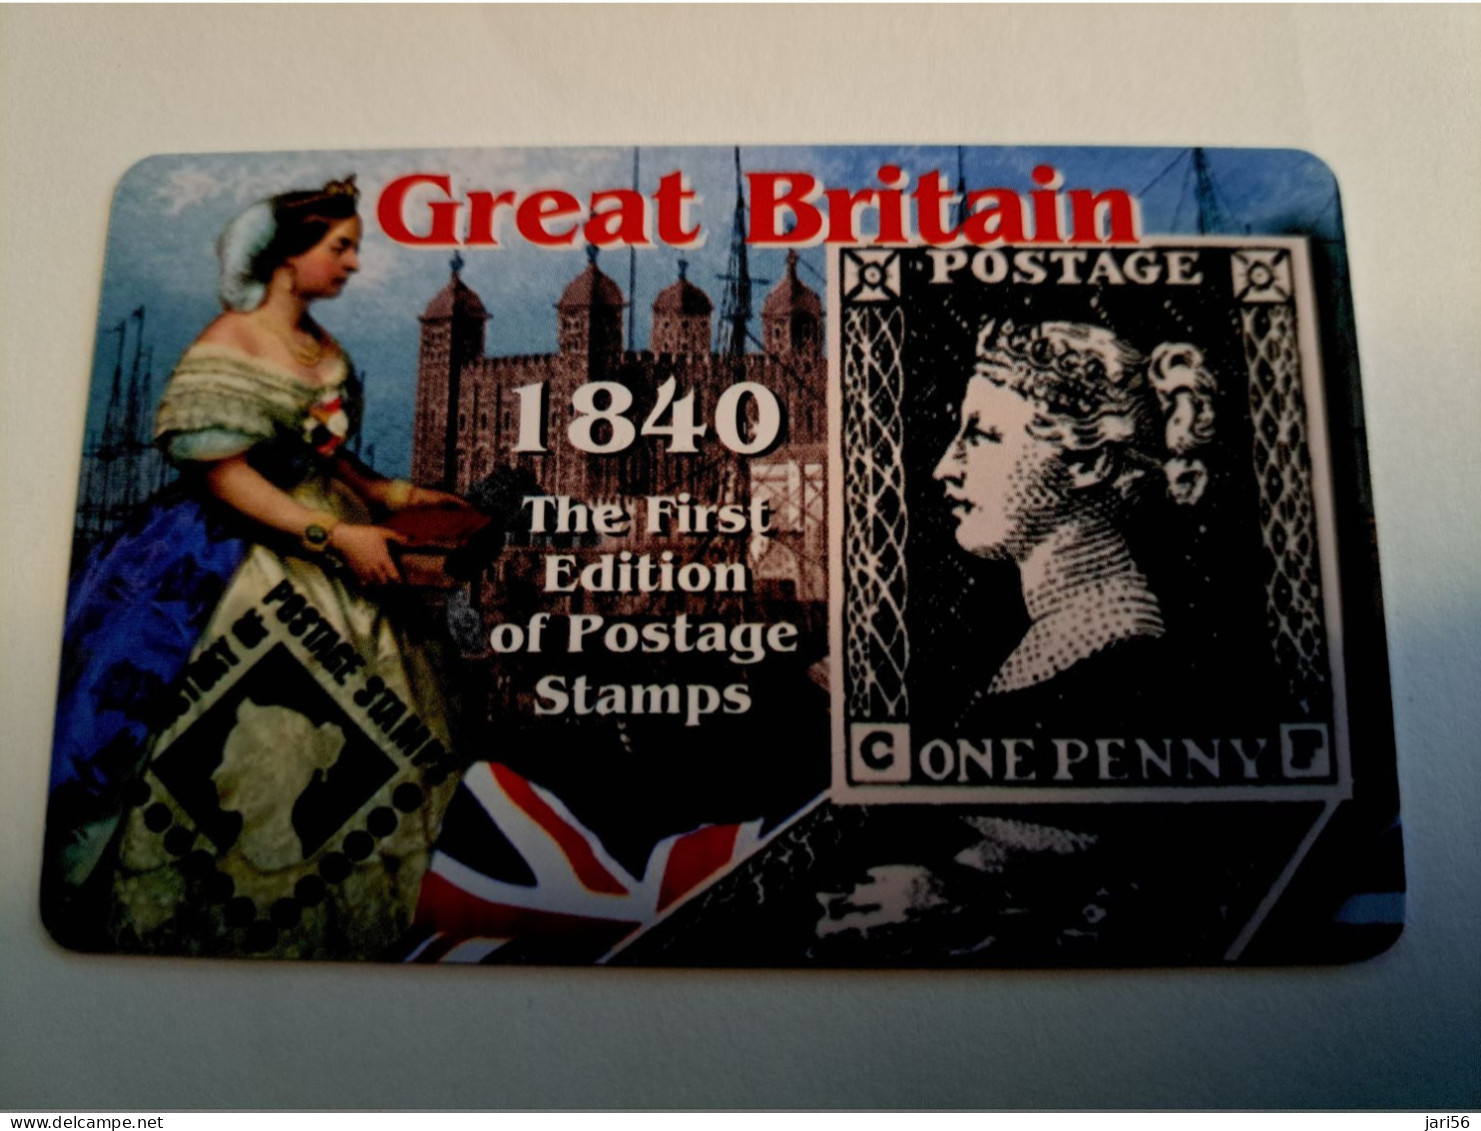 GREAT BRITAIN /20 UNITS /GREAT BRITAIN  1840 FIRST EDITION / DATE12/2010 PREPAID CARD / LIMITED EDITION/ MINT  **15925** - [10] Colecciones